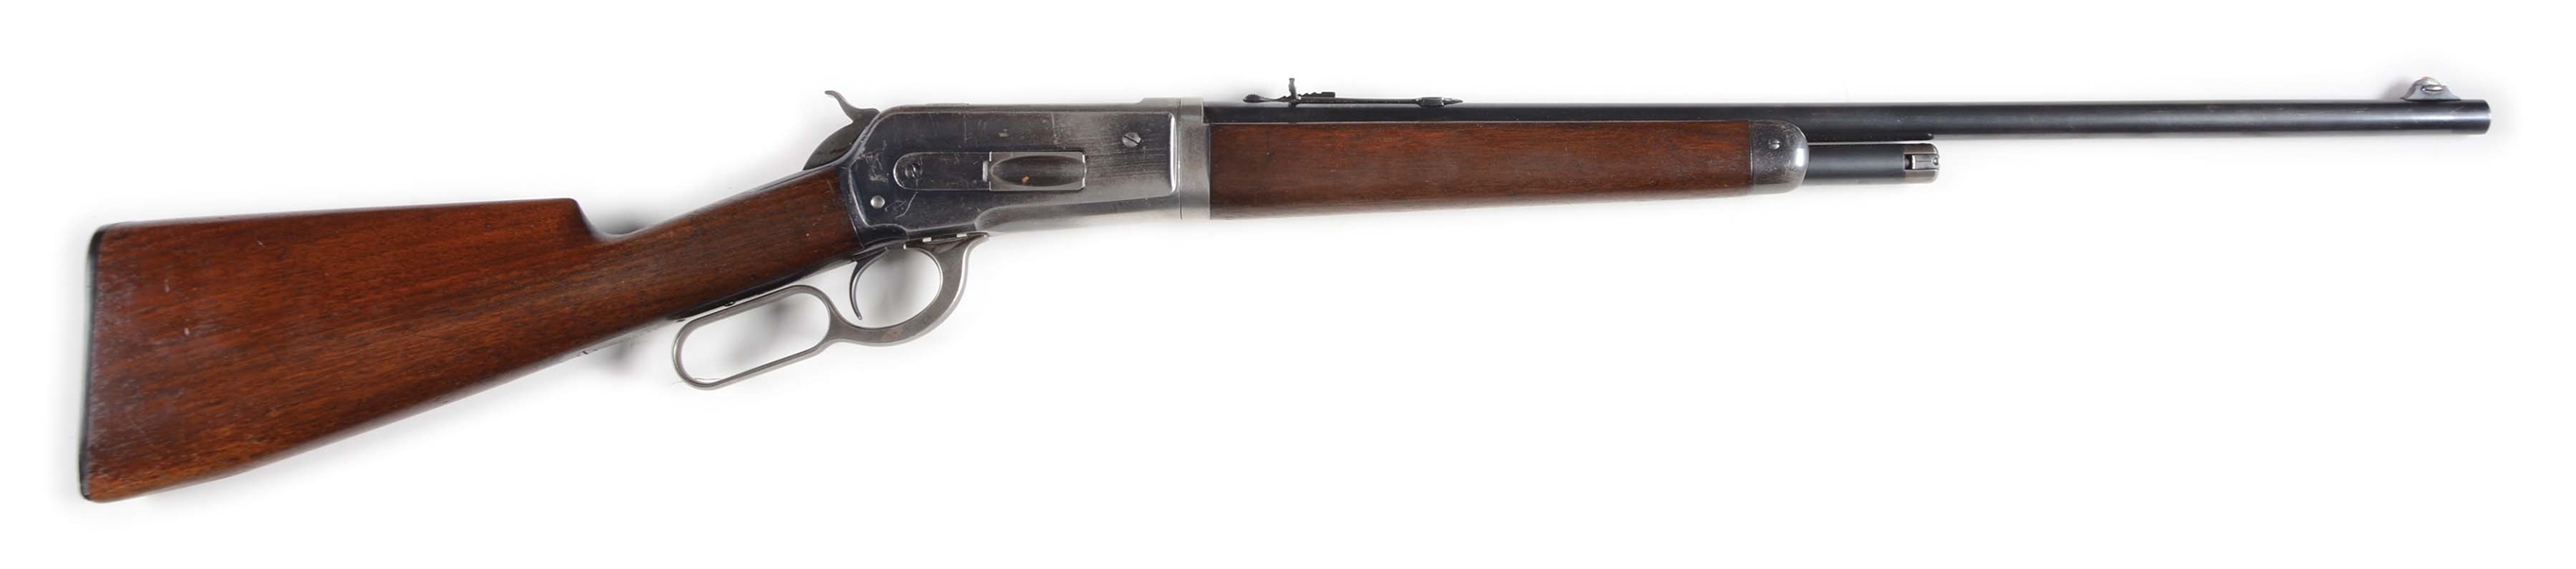 (C) WINCHESTER MODEL 1886 LIGHTWEIGHT TAKEDOWN LEVER ACTION RIFLE (1908/1909).